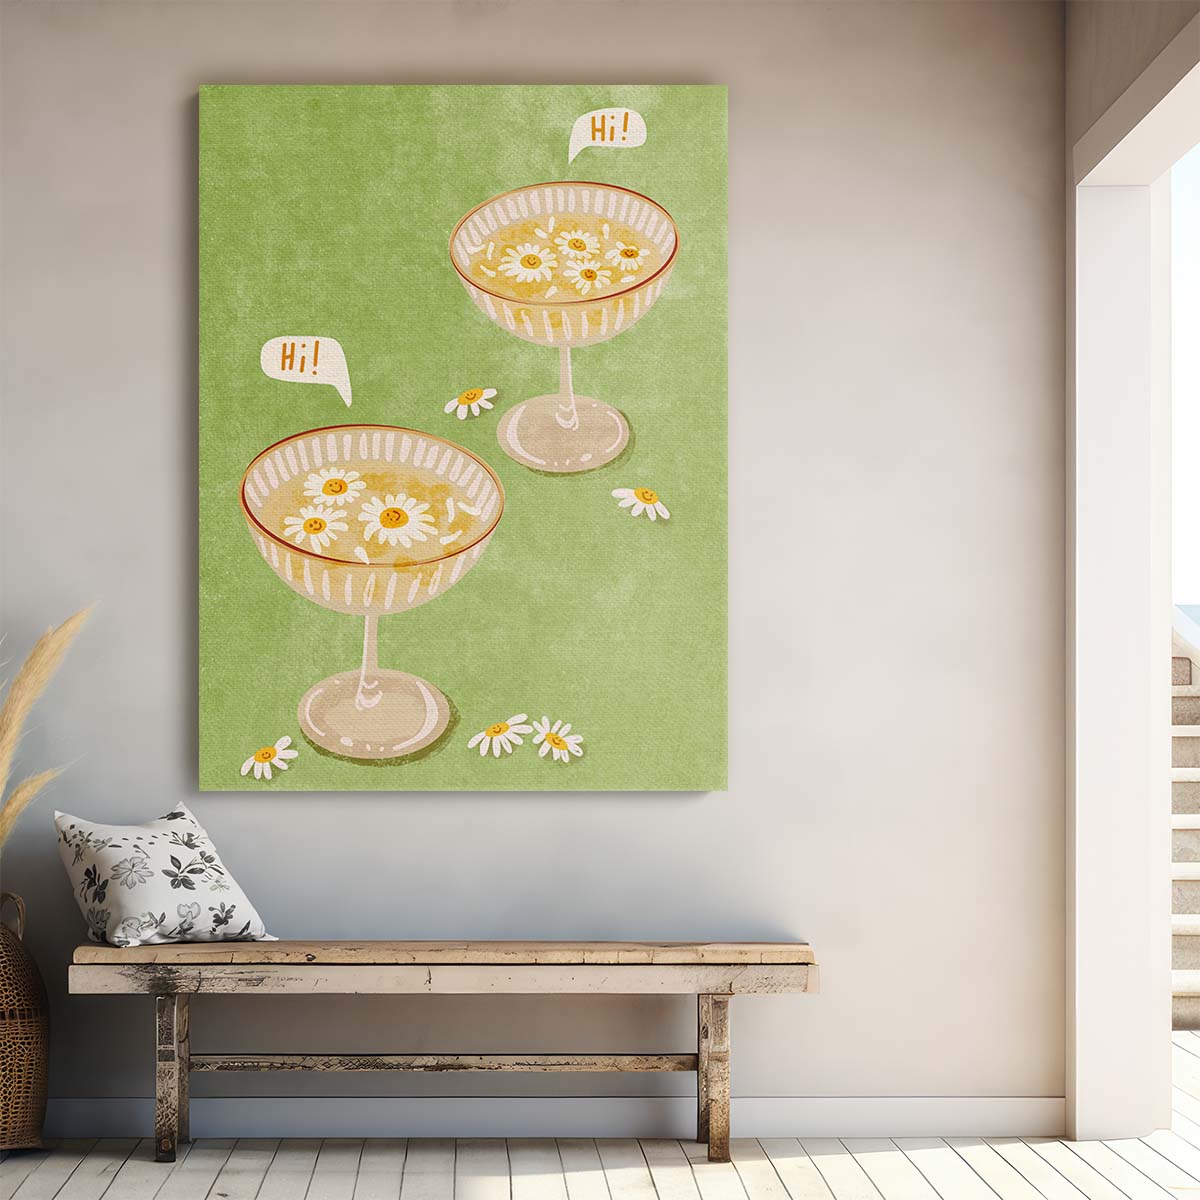 Colorful Summer Cocktail Illustration with Sunflowers Wall Art by Luxuriance Designs, made in USA